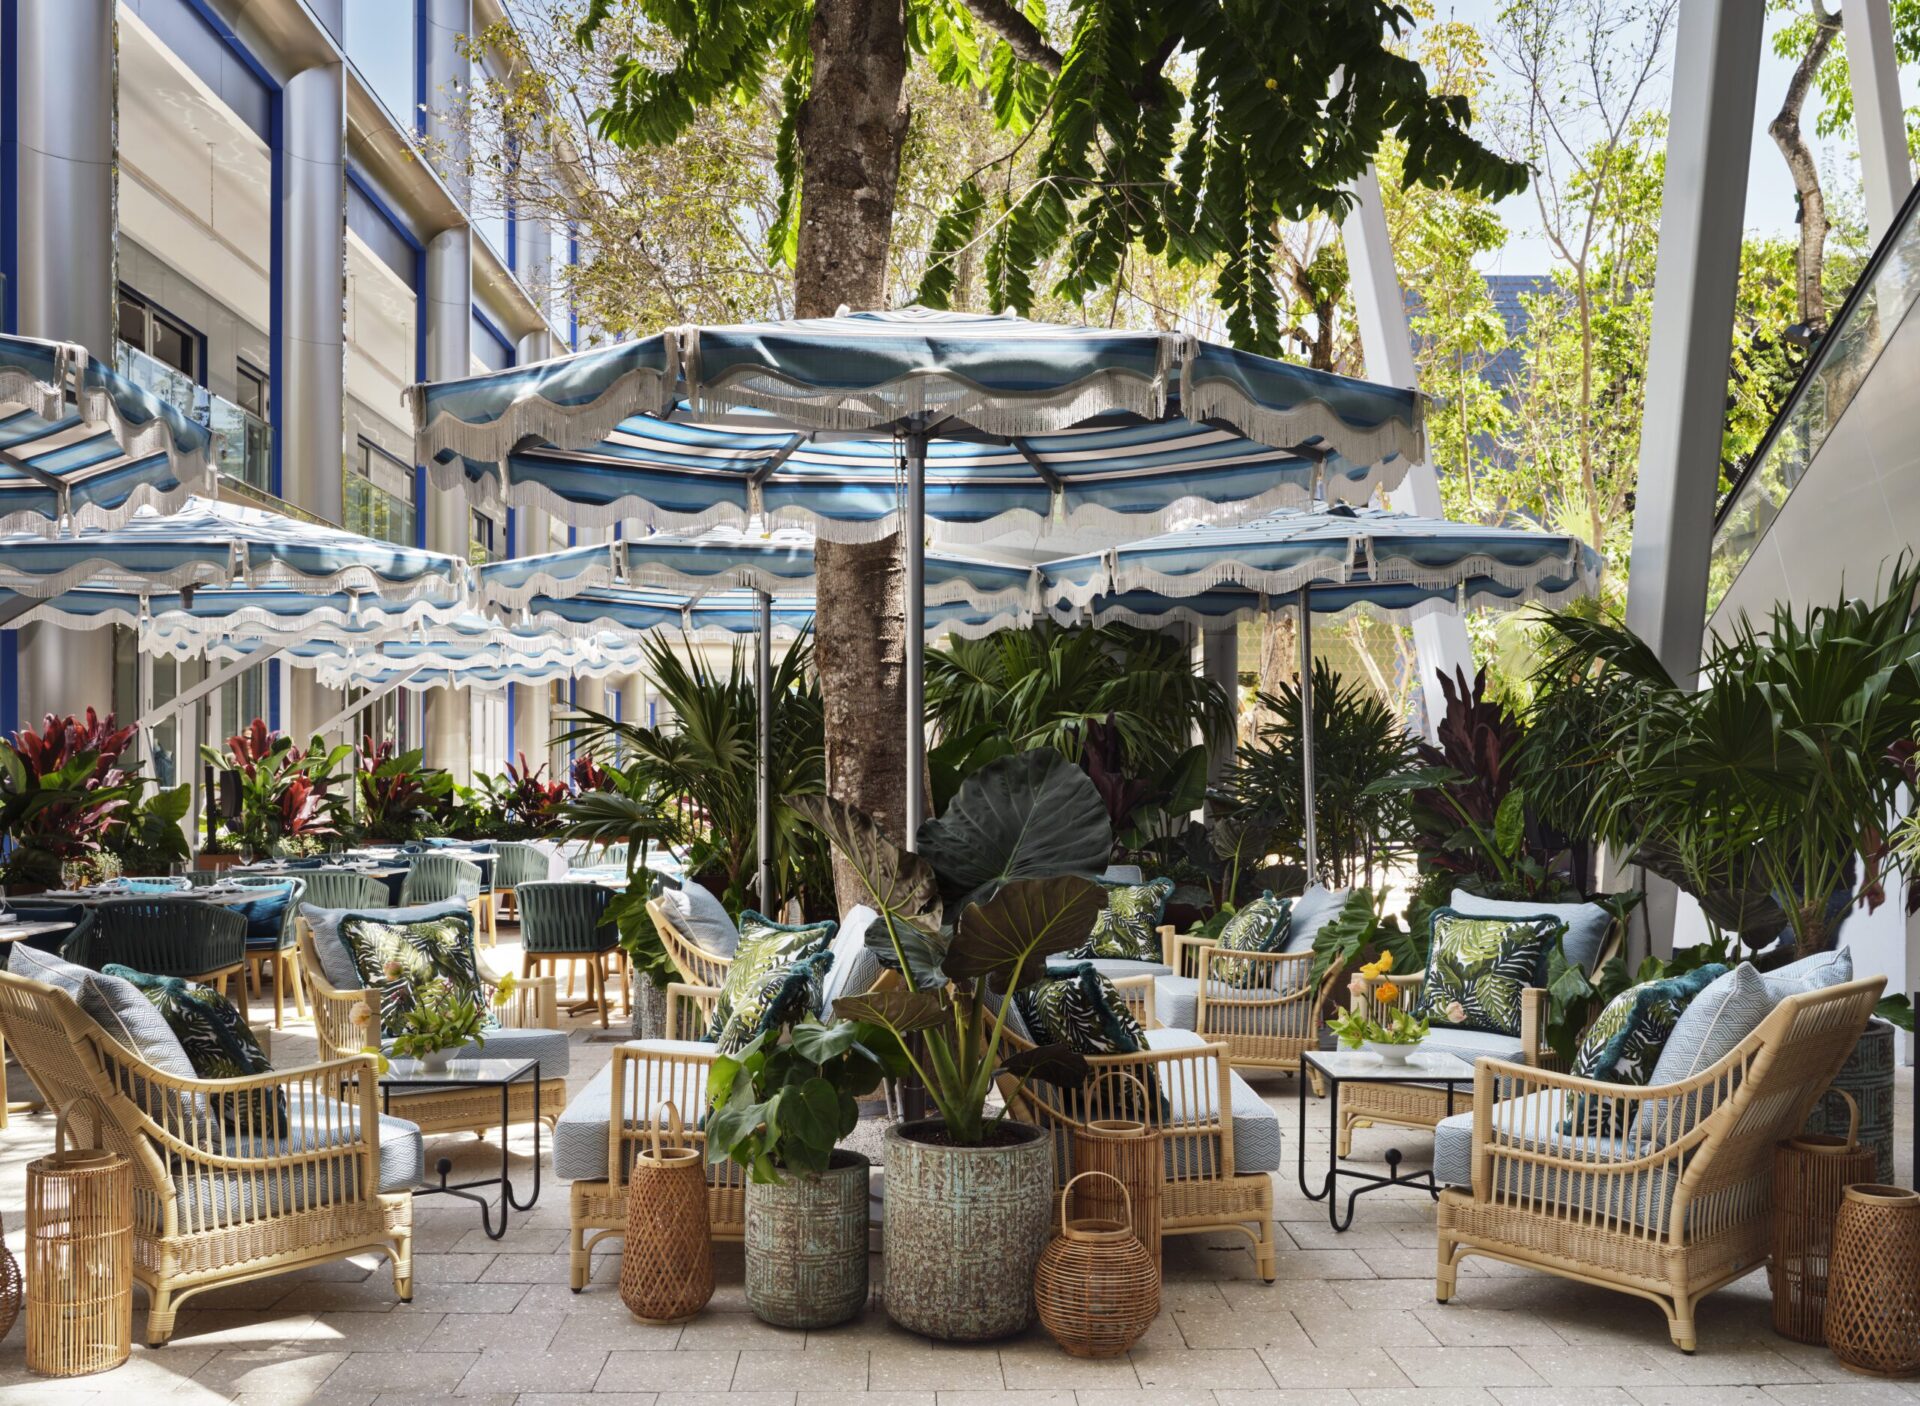 Photograph of outside patio of ZZ's Club with wooden chairs and umbrellas 